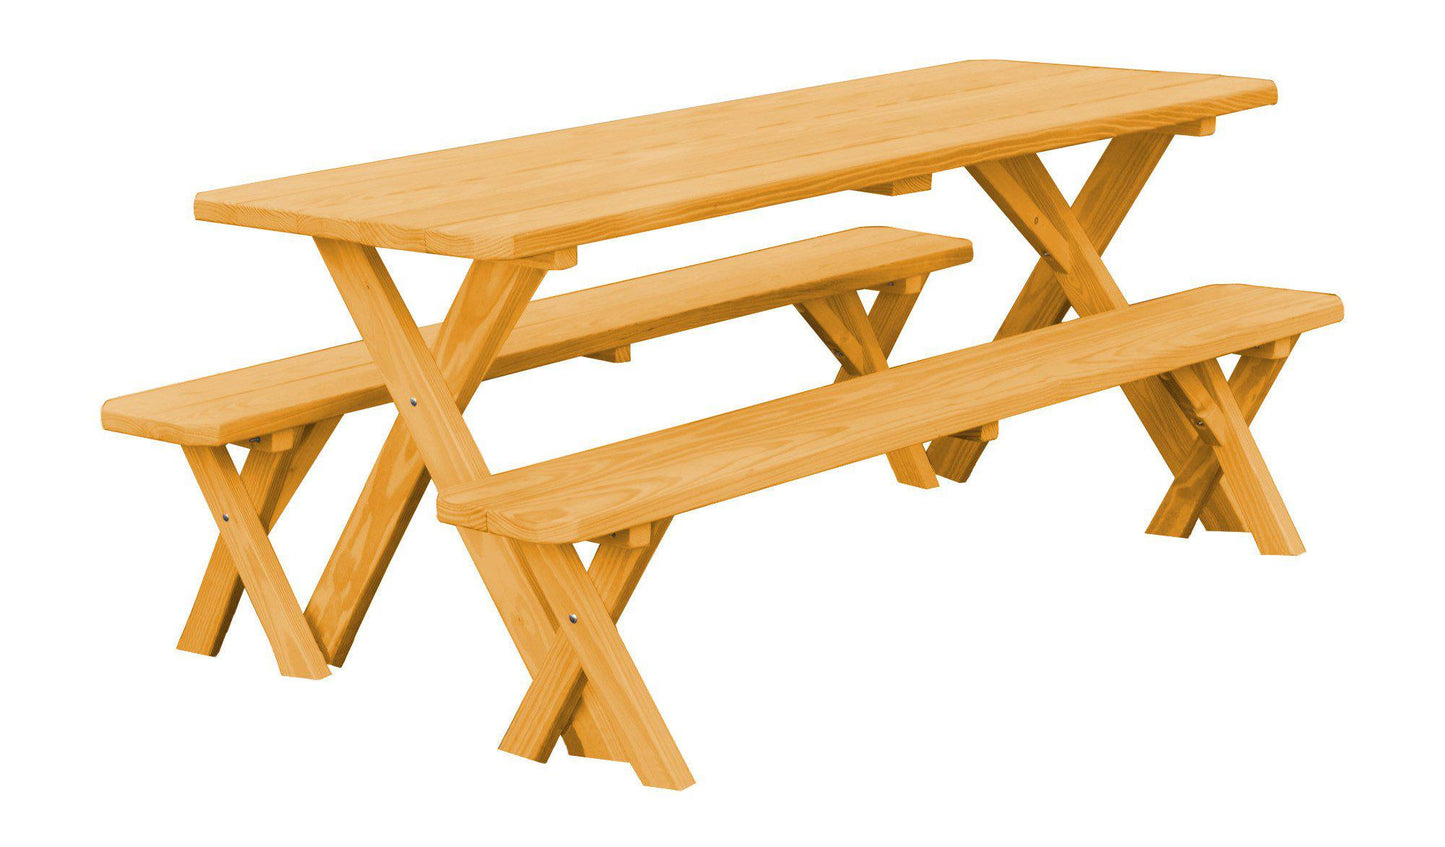 A&L Furniture Co. Pressure Treated Pine 8' Cross-leg Table w/2 Benches - LEAD TIME TO SHIP 10 BUSINESS DAYS